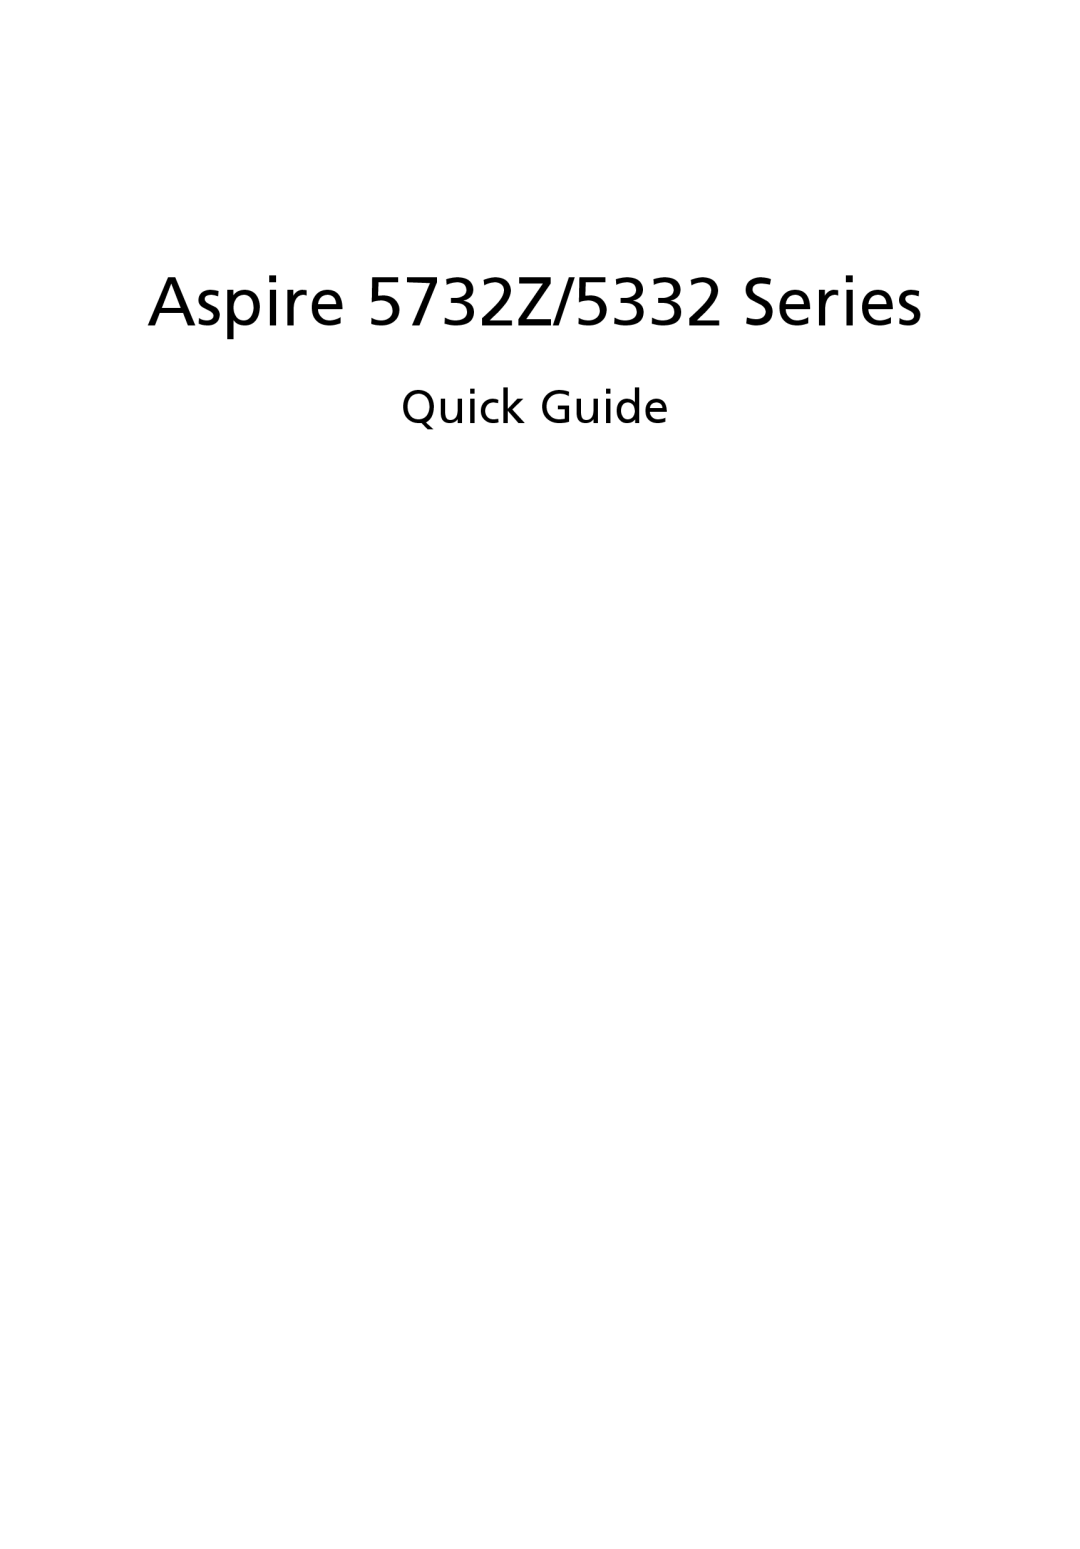 Acer 5732Z Series manual Quick Guide, Aspire 5732Z/5332 Series 